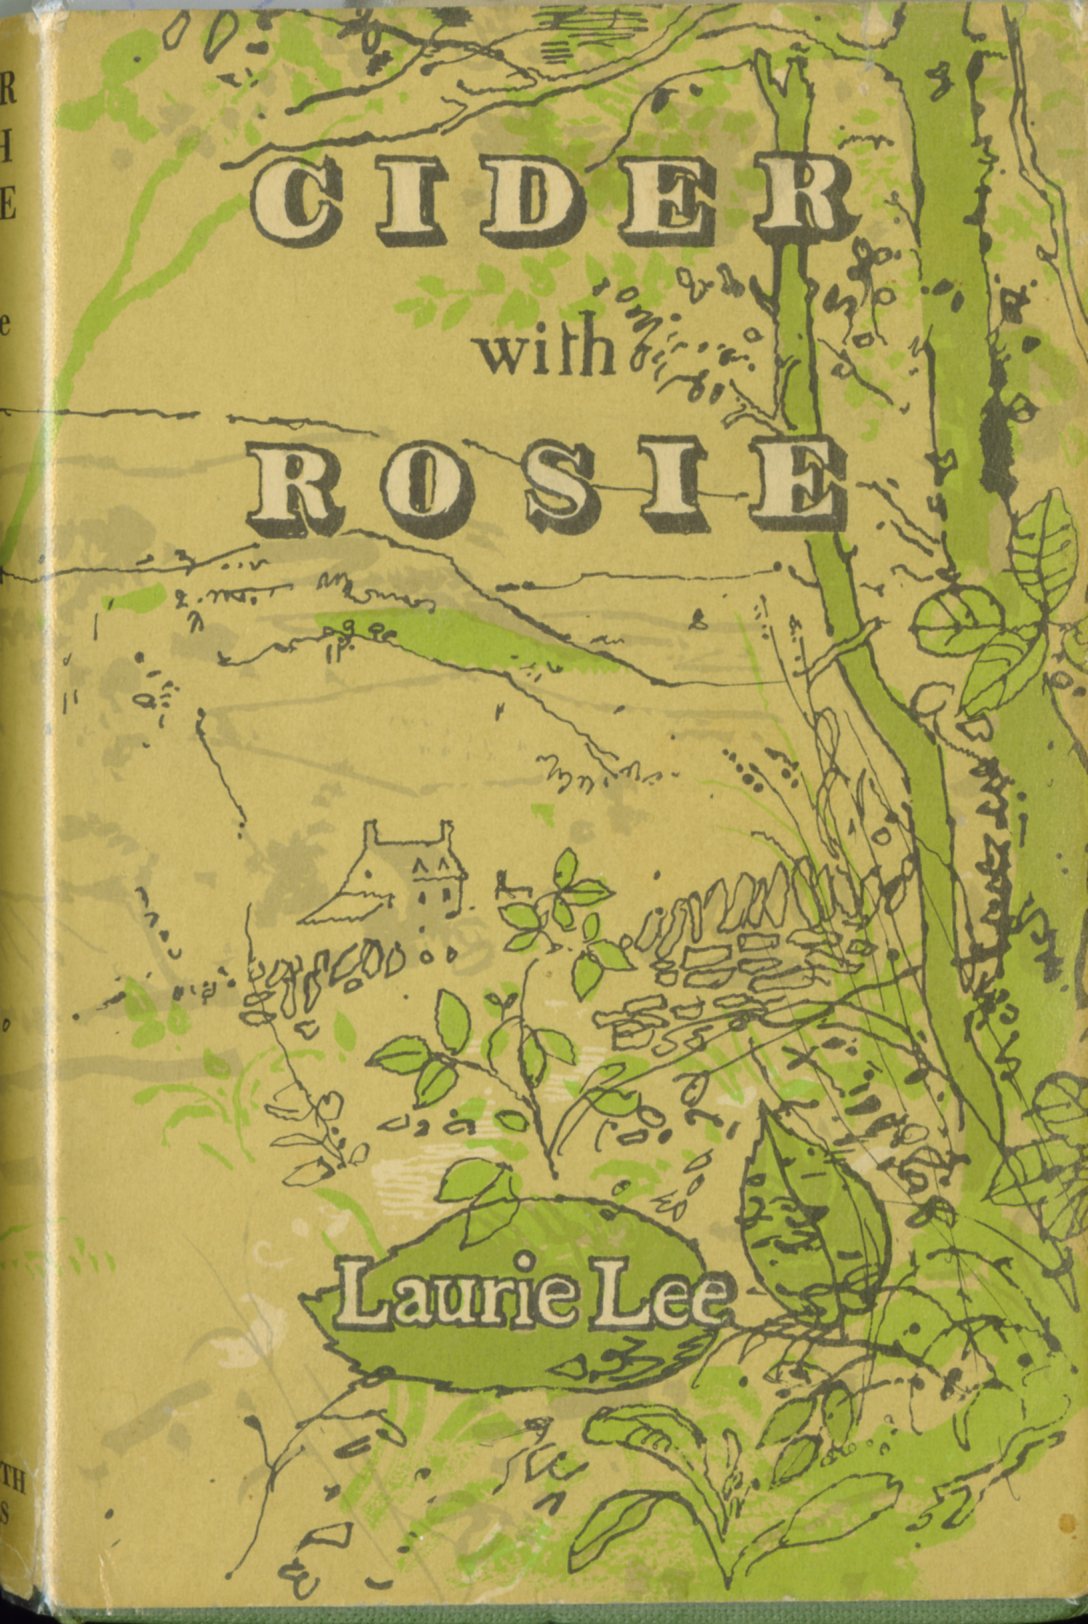 Lee (Laurie) Cider with Rosie, 8vo, L. (The Hogarth Press) 1959, First Edn., frontis, cloth & d.j.